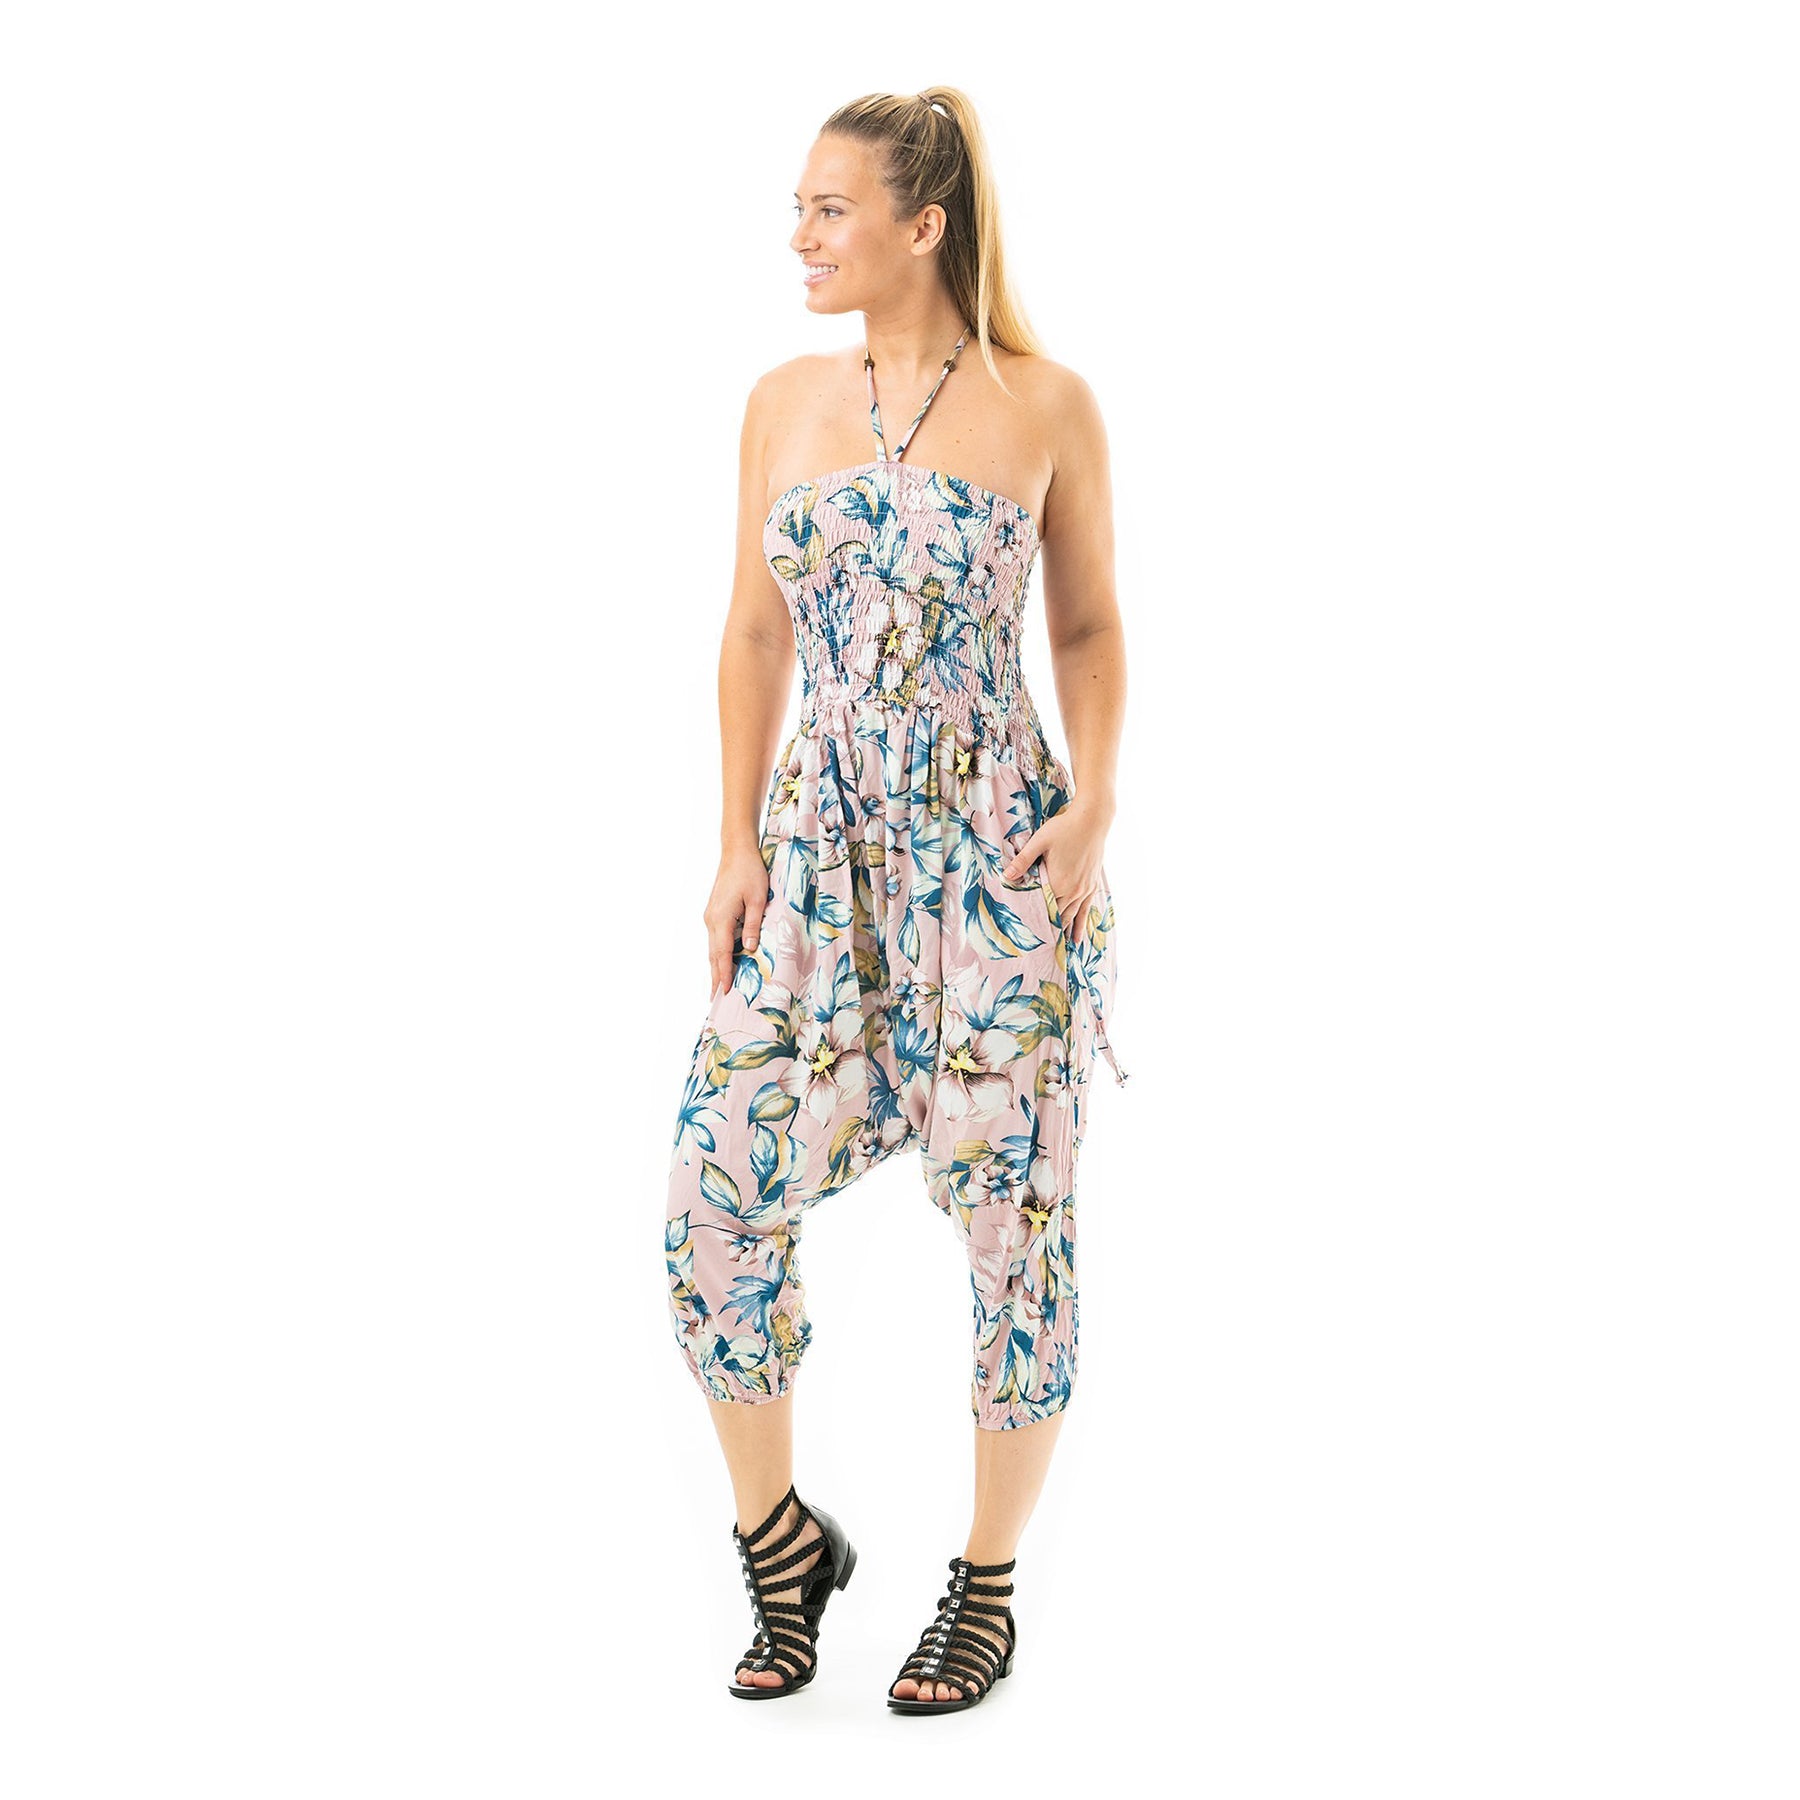 Buddha Pants Lilly Print Pants and Jumper 2 in 1 Suit 1800x1800